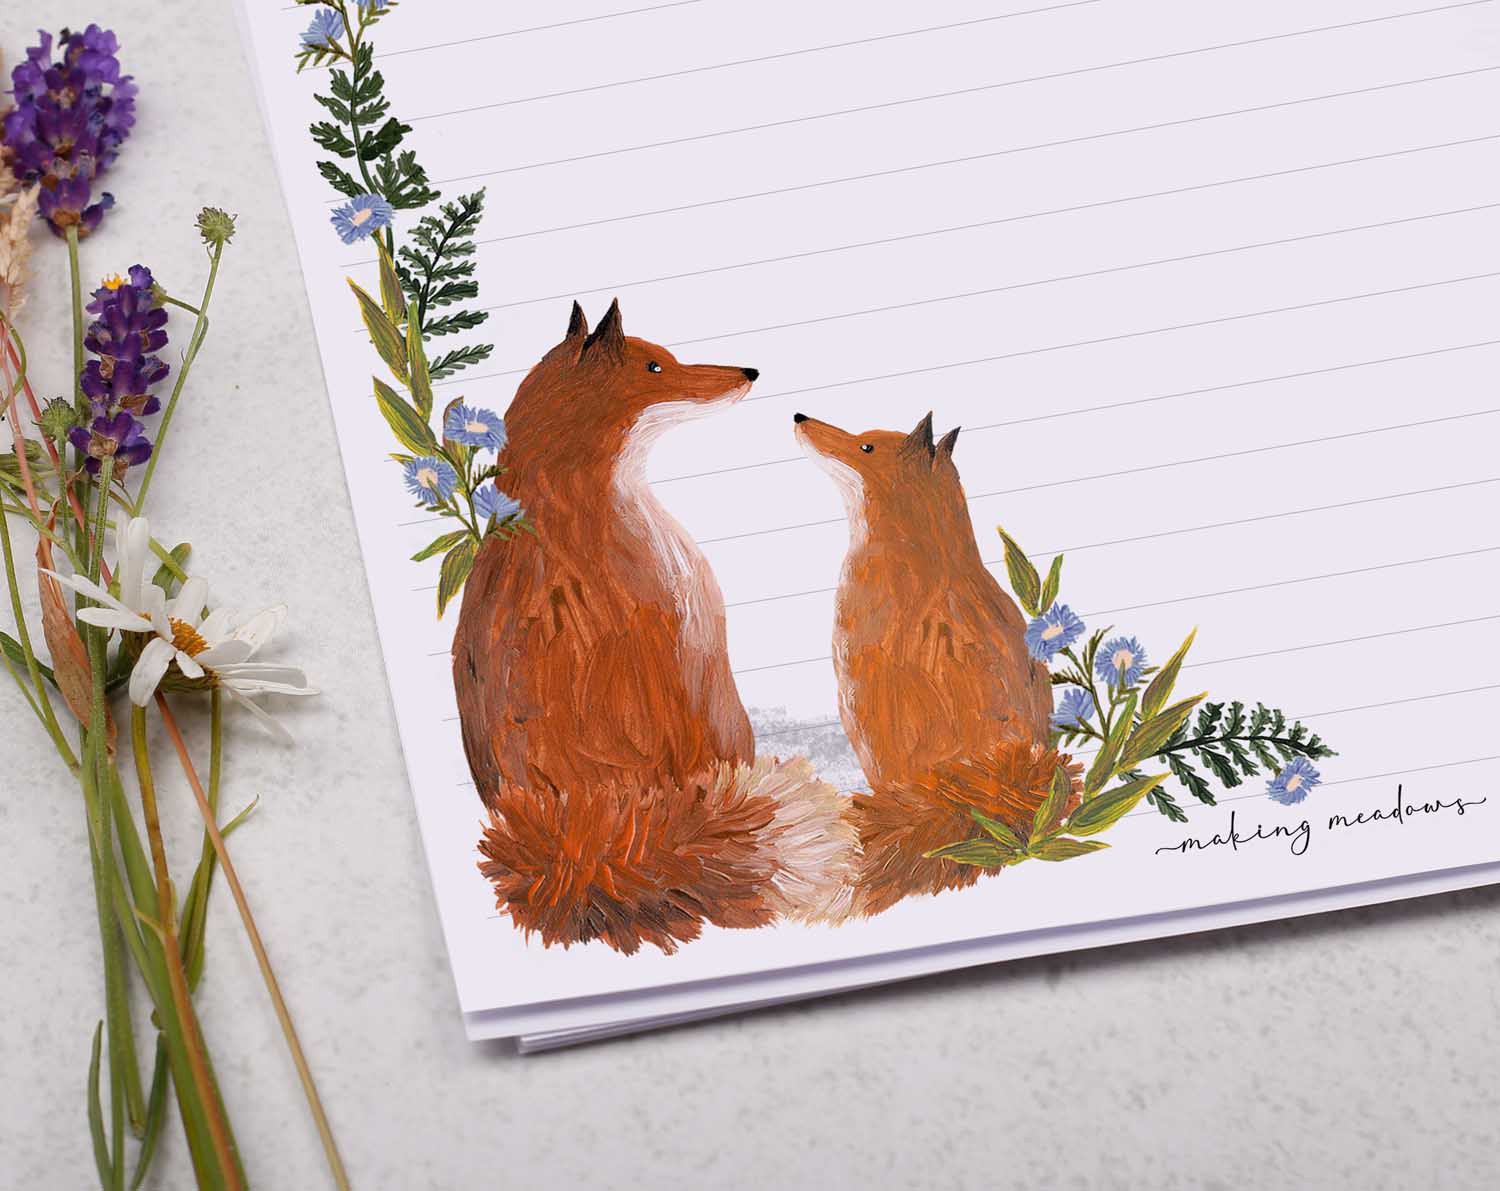 A4 letter writing paper sheets with a cute pair of red foxes and a delicate blue floral watercolour border cascading around the letter paper edge.